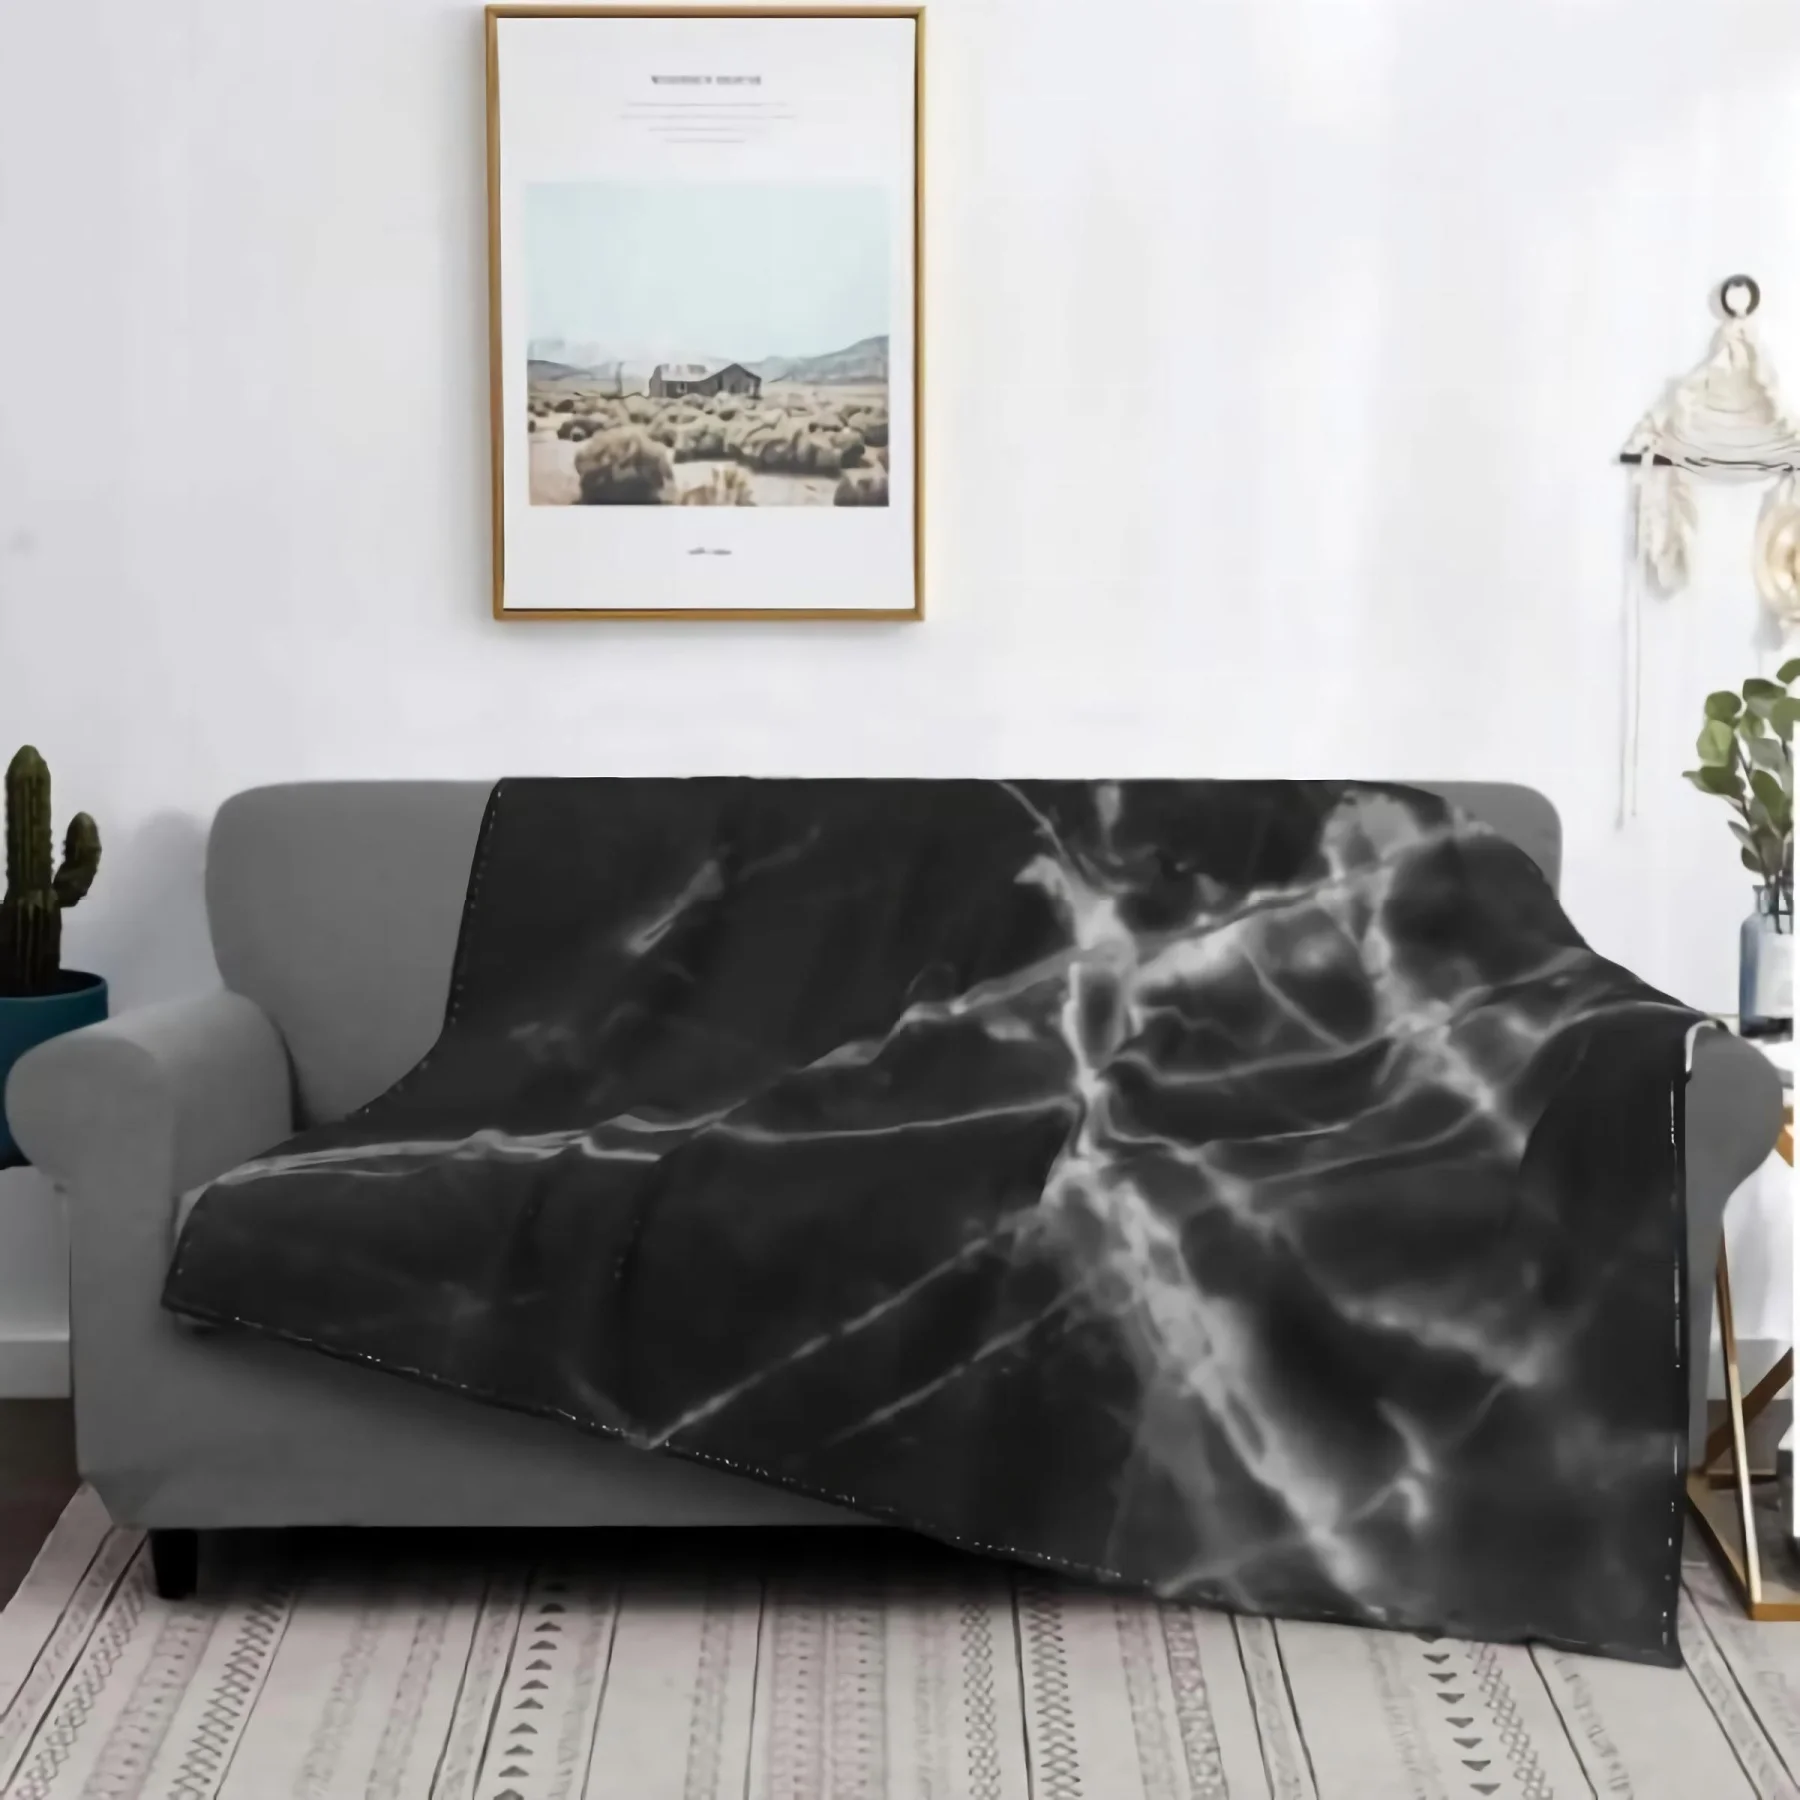 

Comfort Velvet Super Soft Black Marble Prints Blanket Home Décor Warm Throws for Winter Bedding Couch and Gift 80x60inch